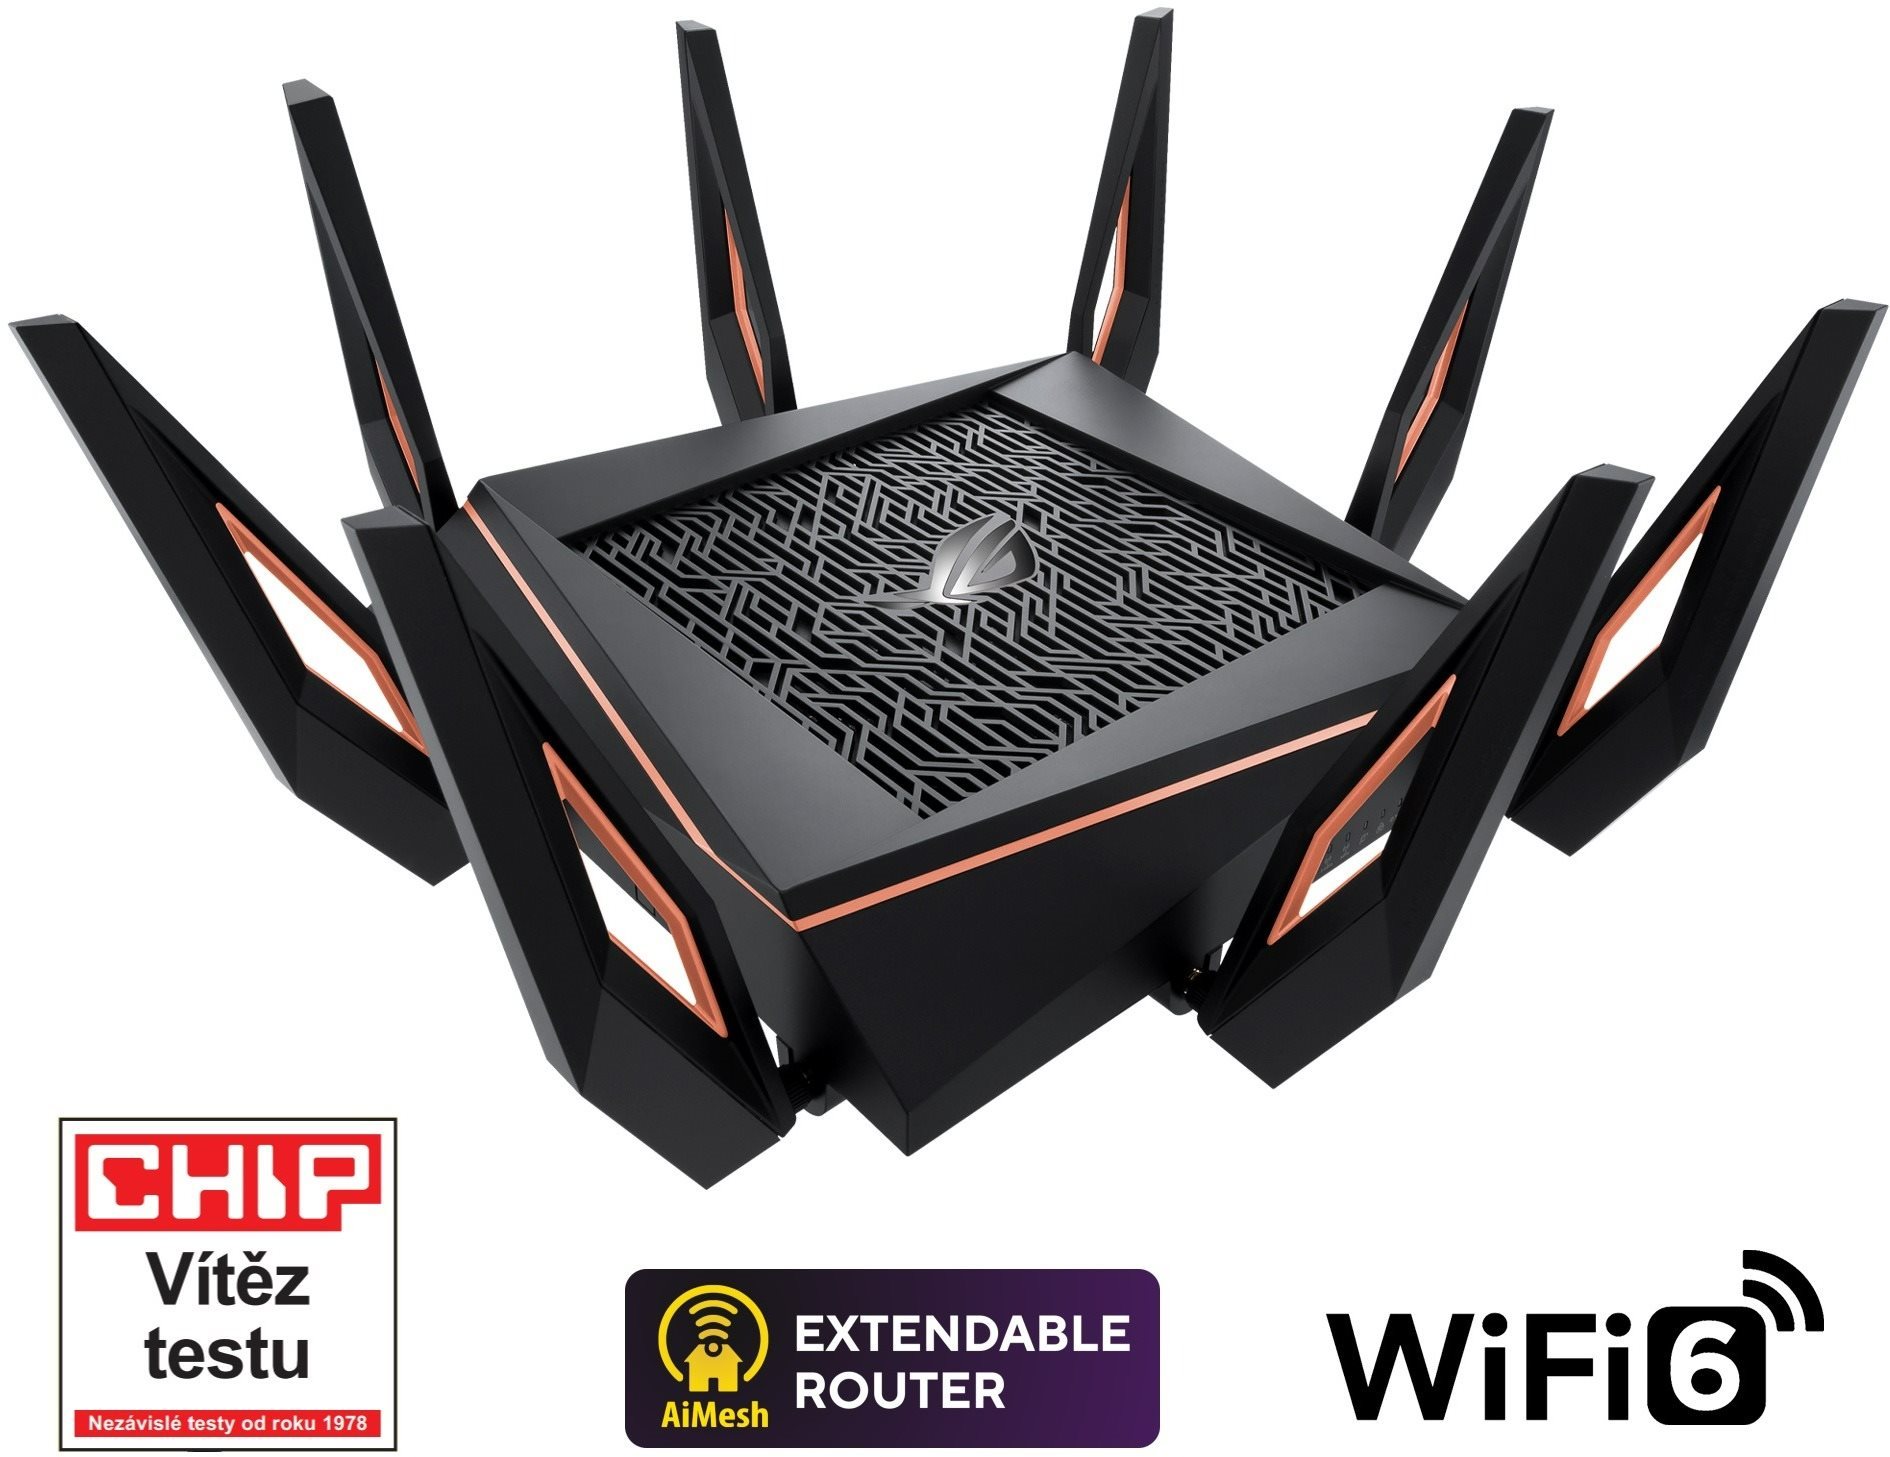 WiFi router ASUS GT-AX11000